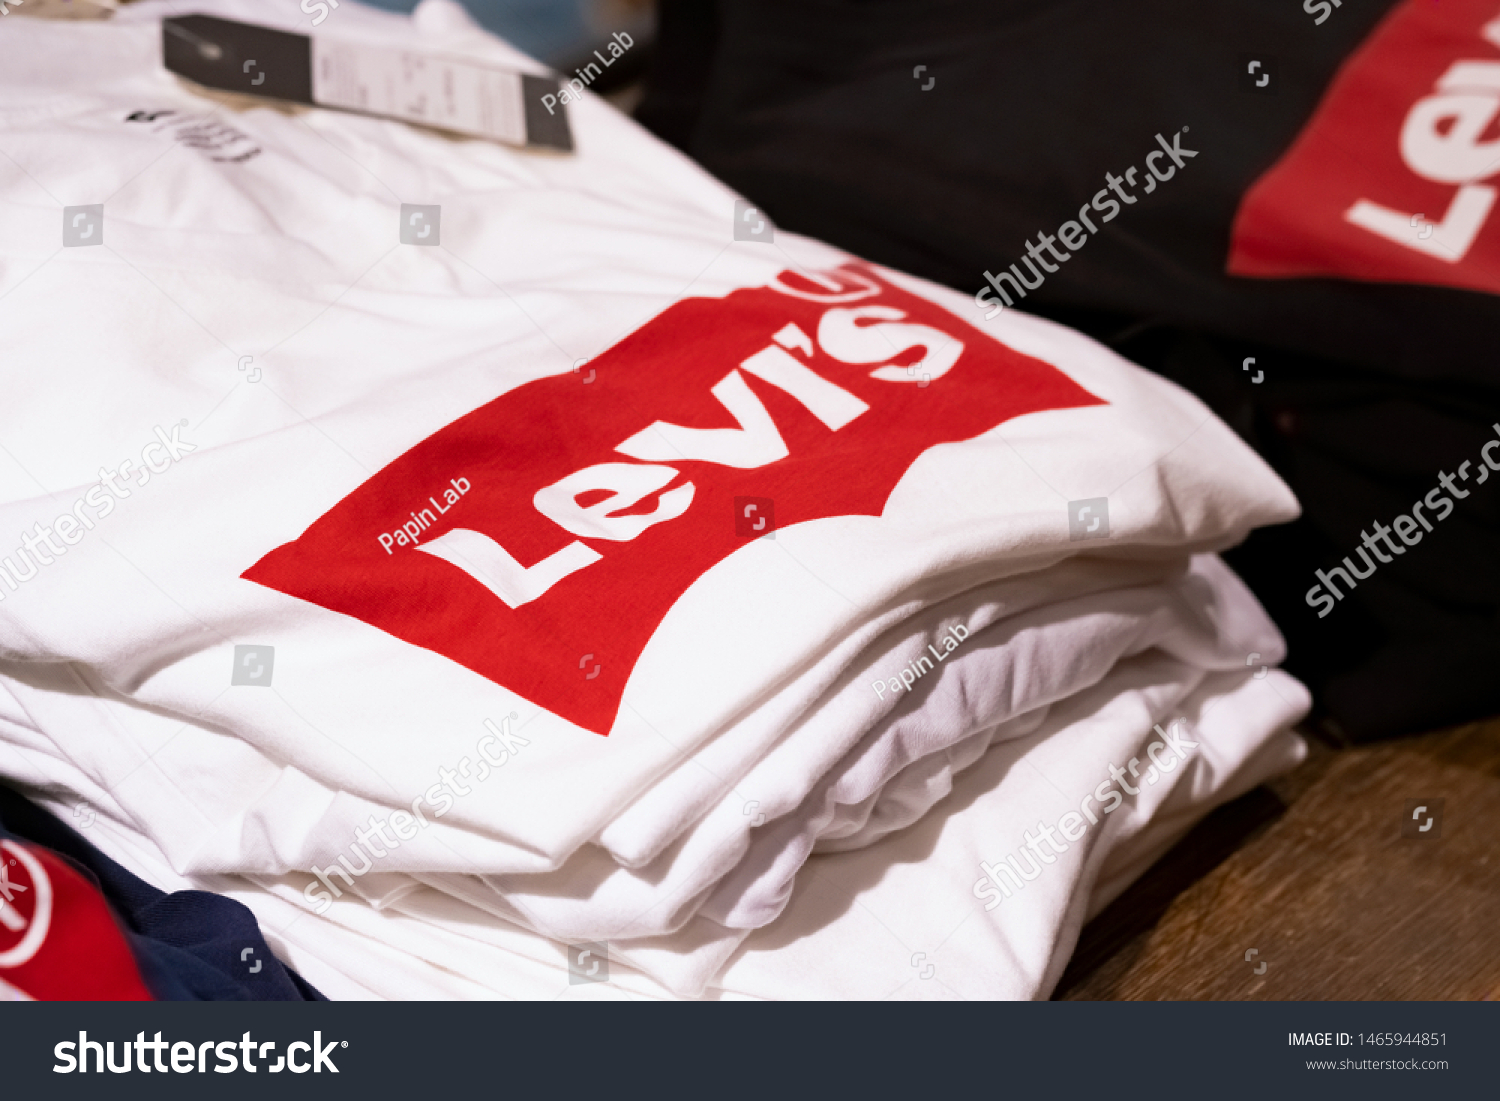 levi strauss founded